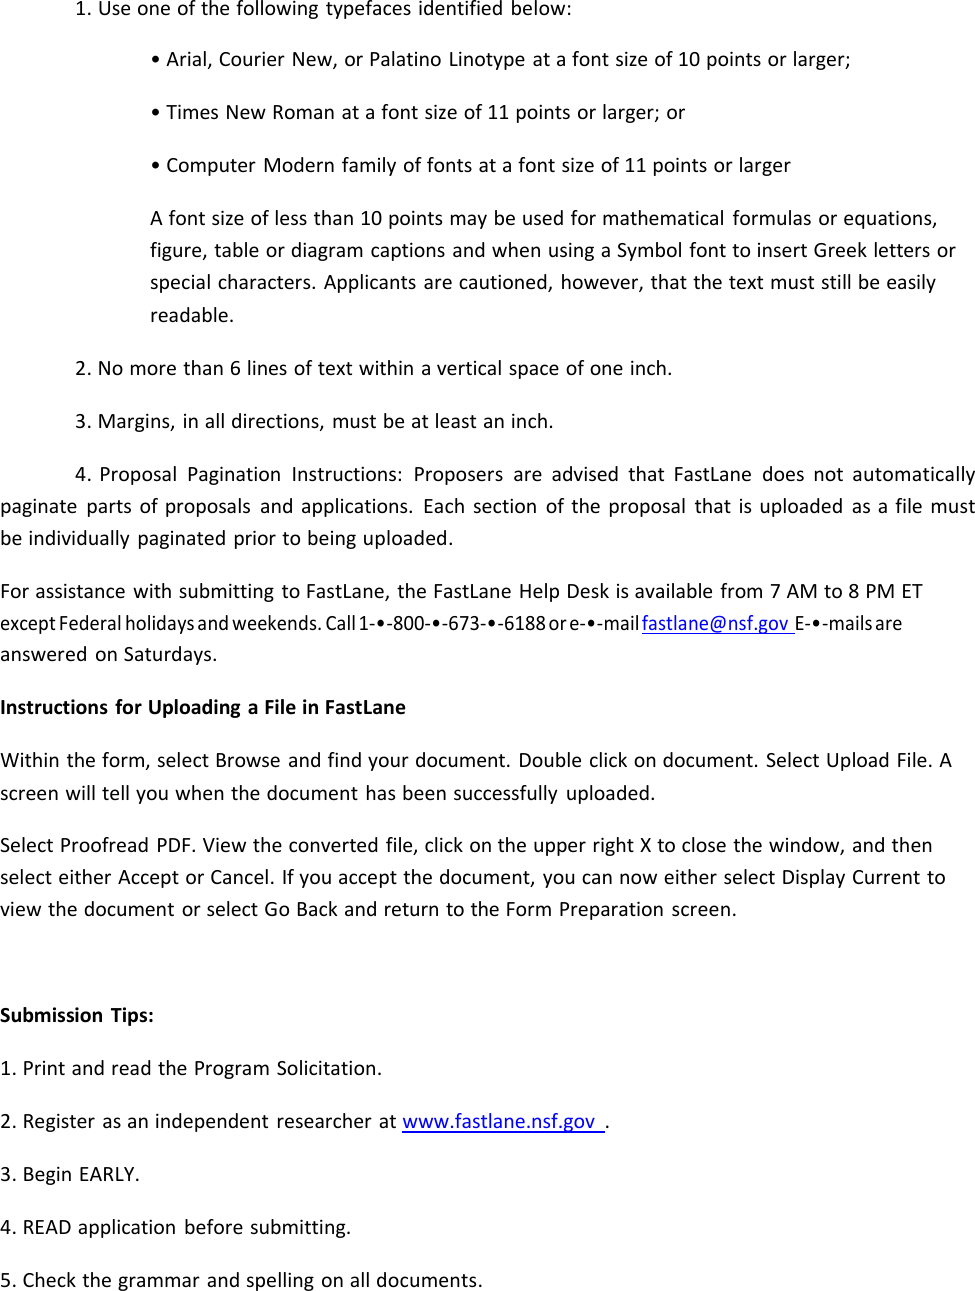 Page 2 of 8 - Instructions - How To Applicant Apply Prfb